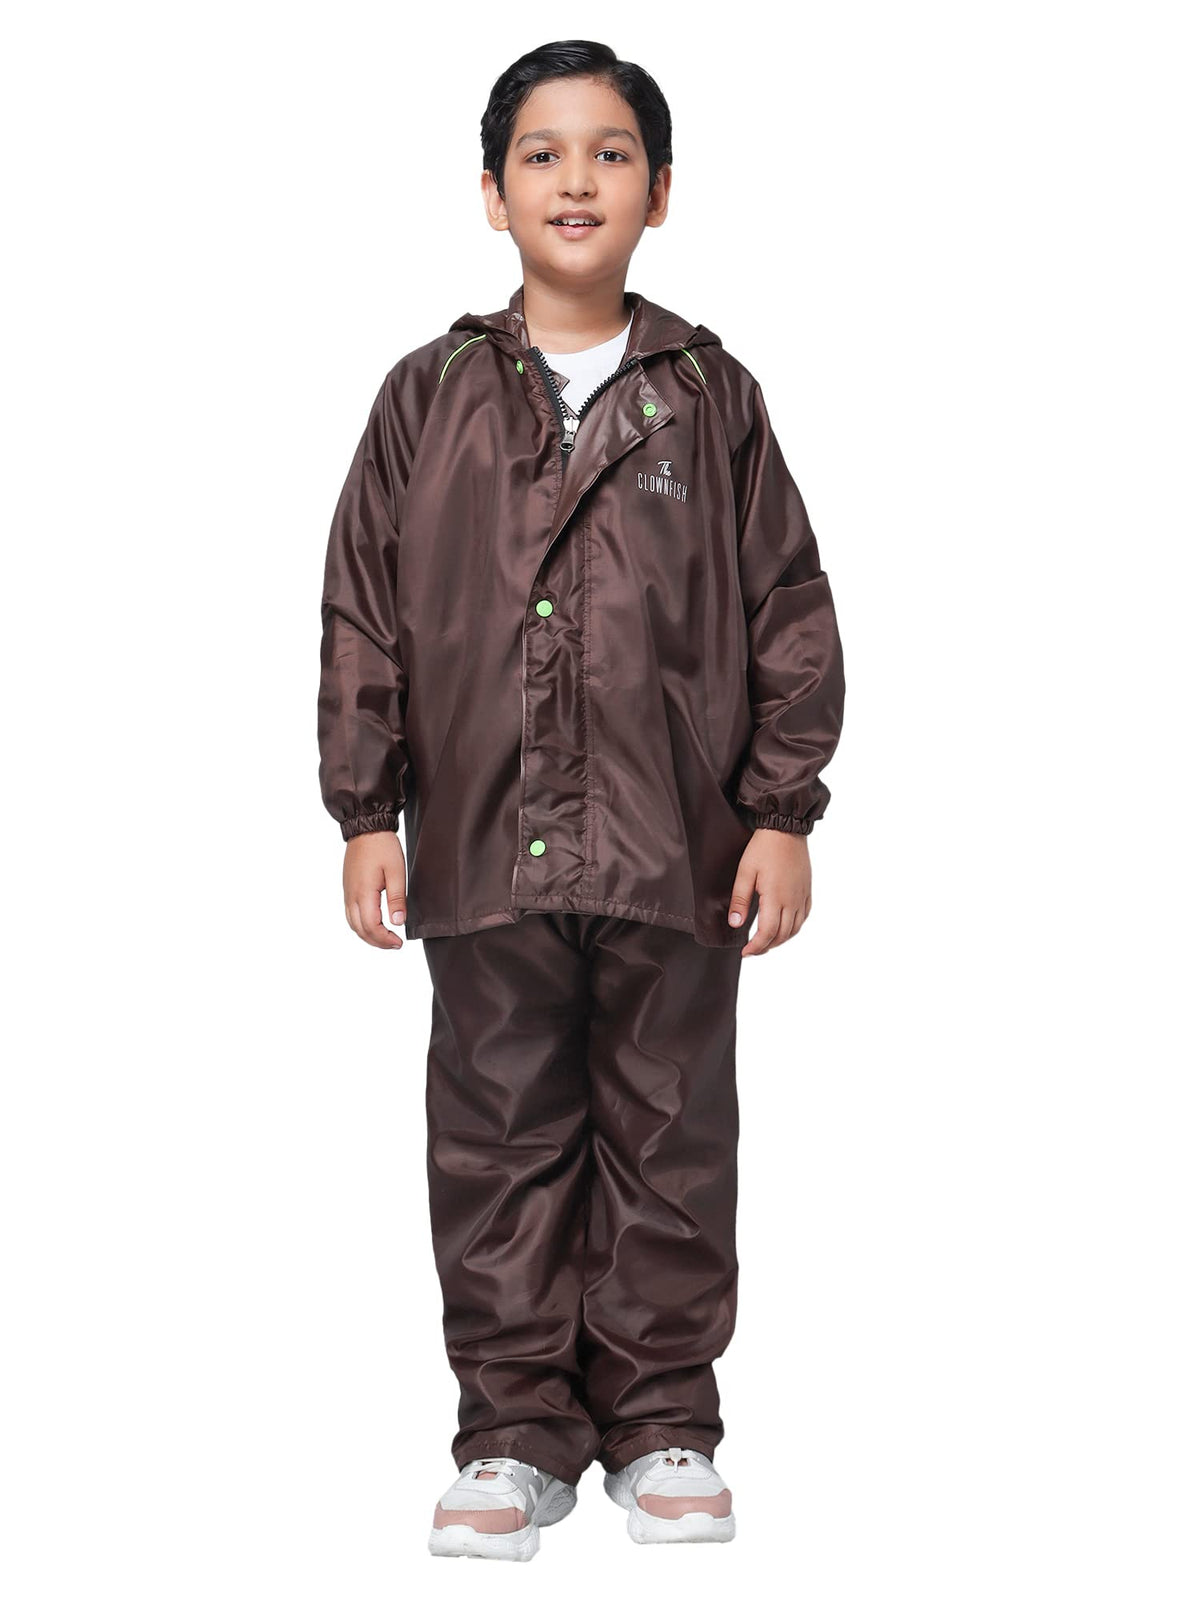 STRAUSS THE CLOWNFISH Duke Series Kid's Waterproof Polyester Double Coating Reversible Raincoat with Hood and Reflector Logo at Back. Set of Top and Bottom. Printed Pouch Age-8-10 years (Brown)